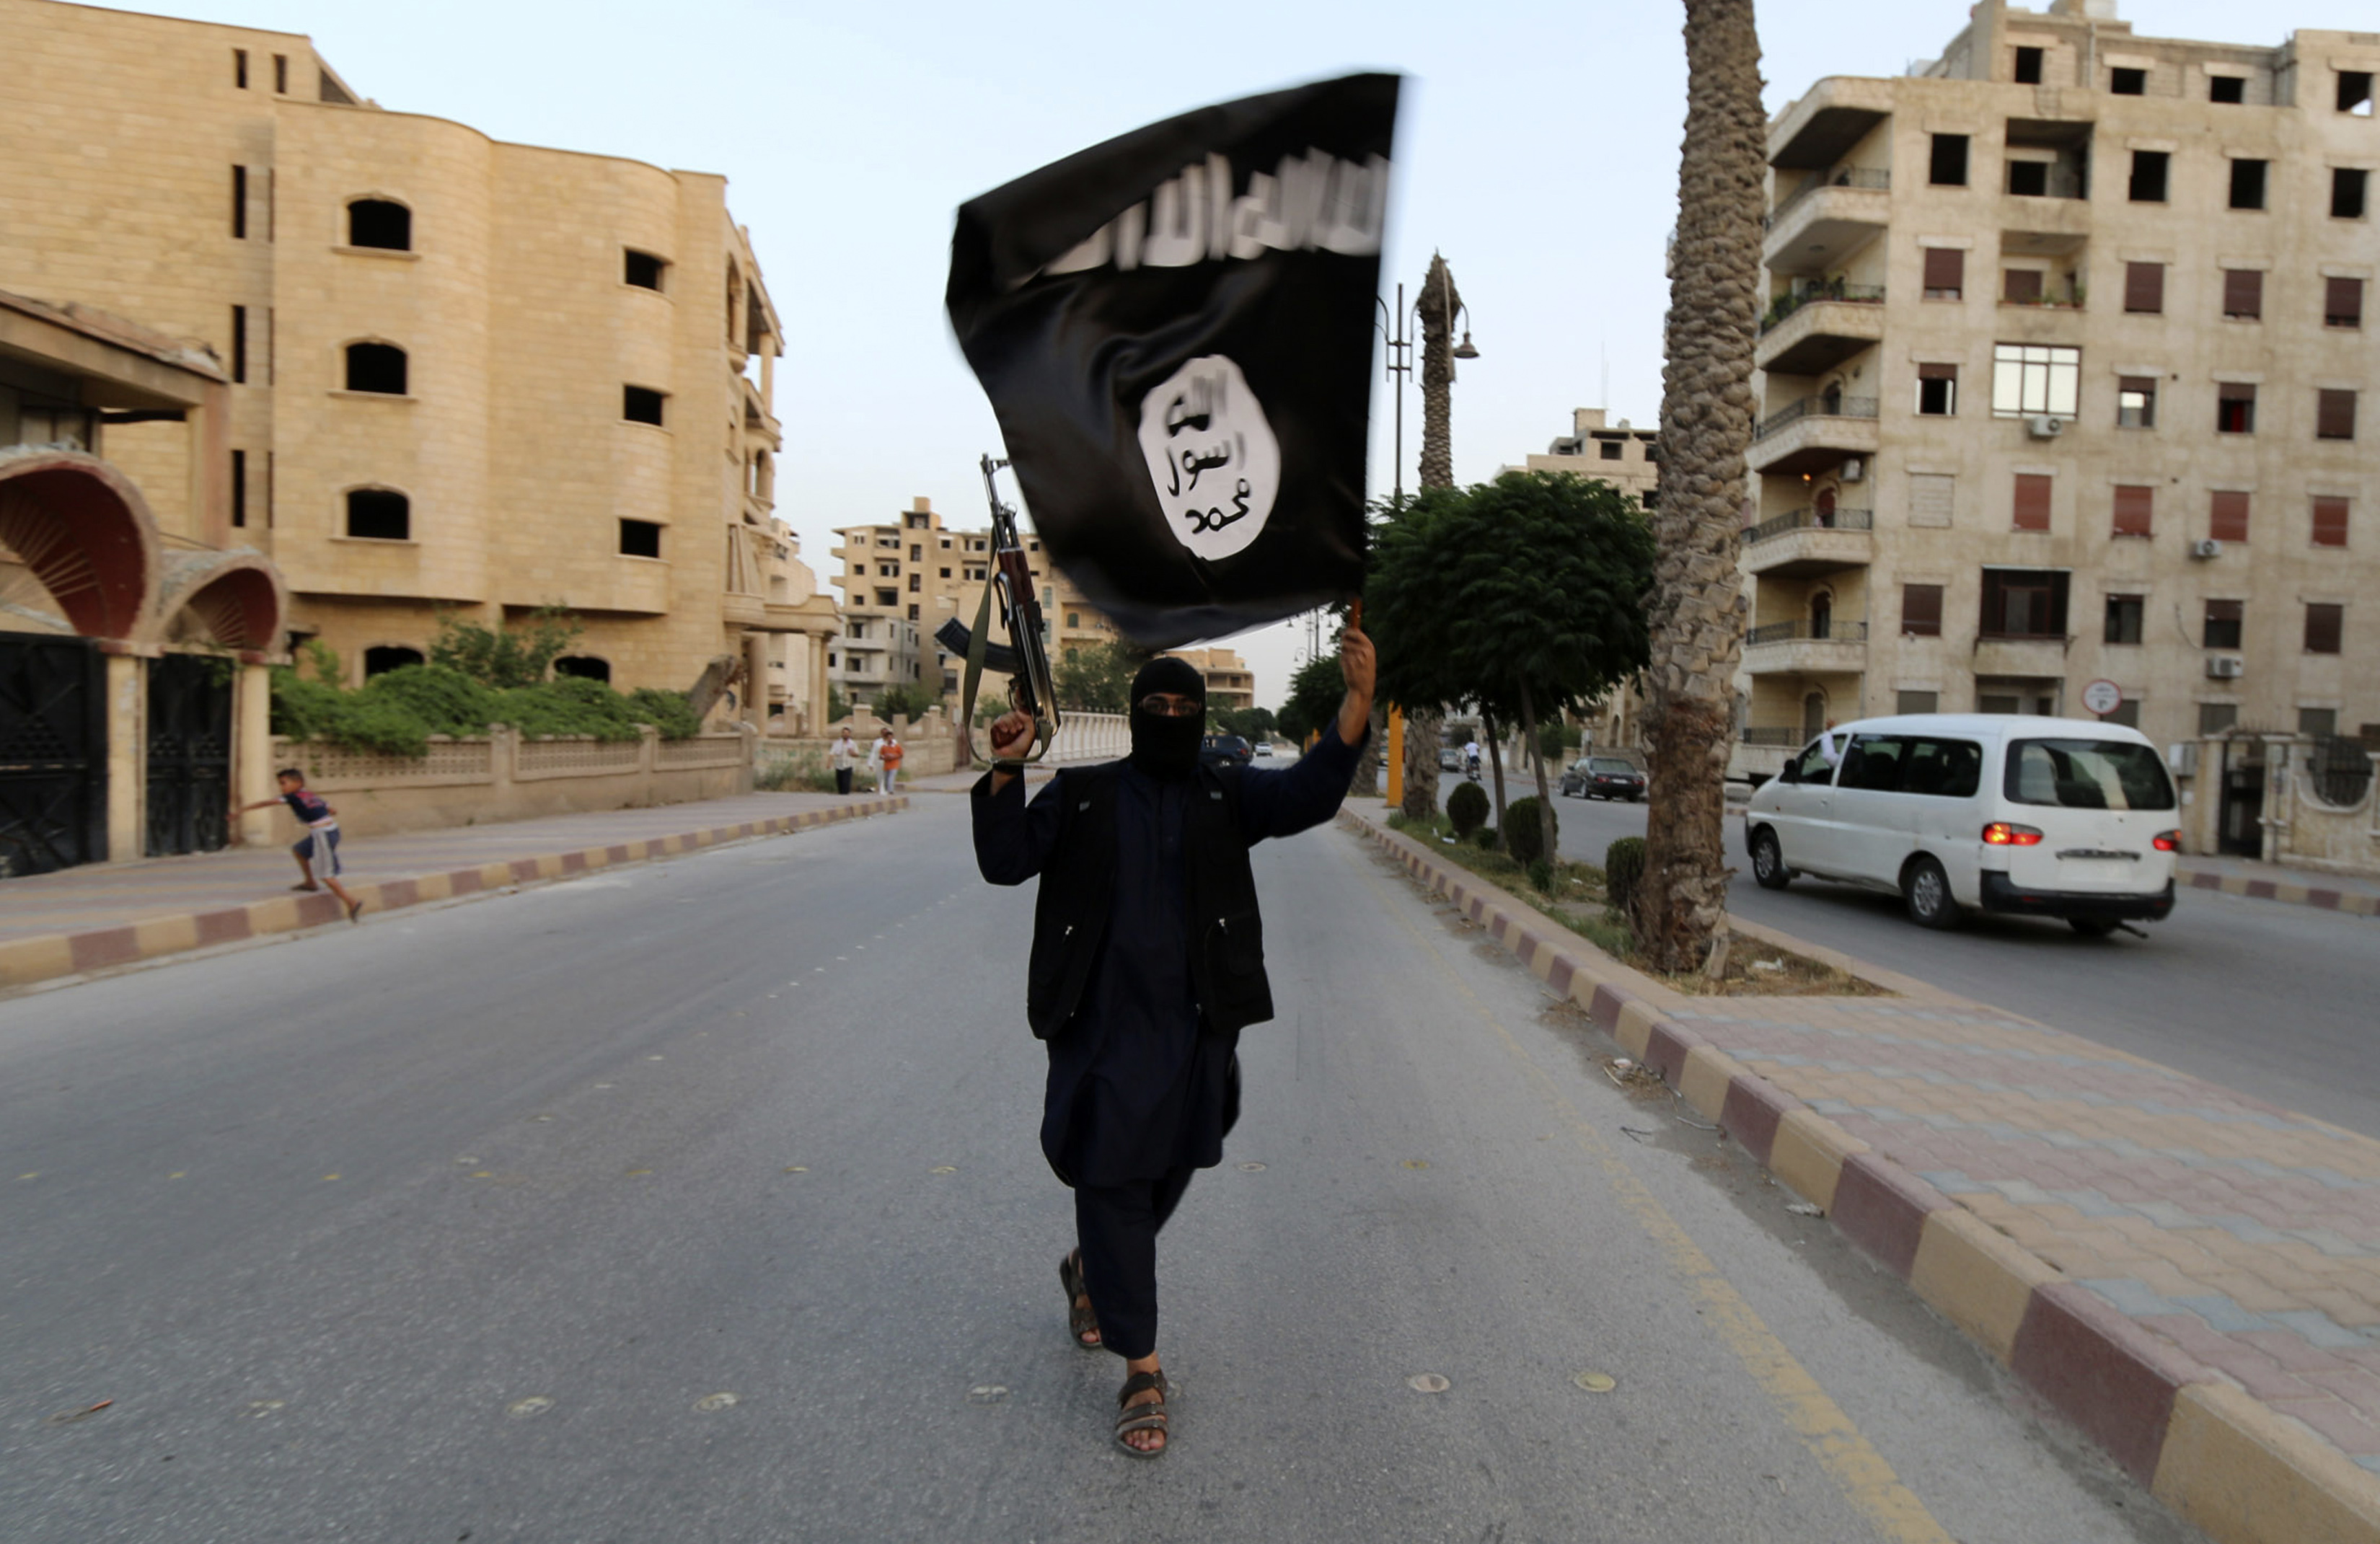 A member loyal to ISIS waves a flag in Raqqa, Syria June 29, 2014 (Reuters)